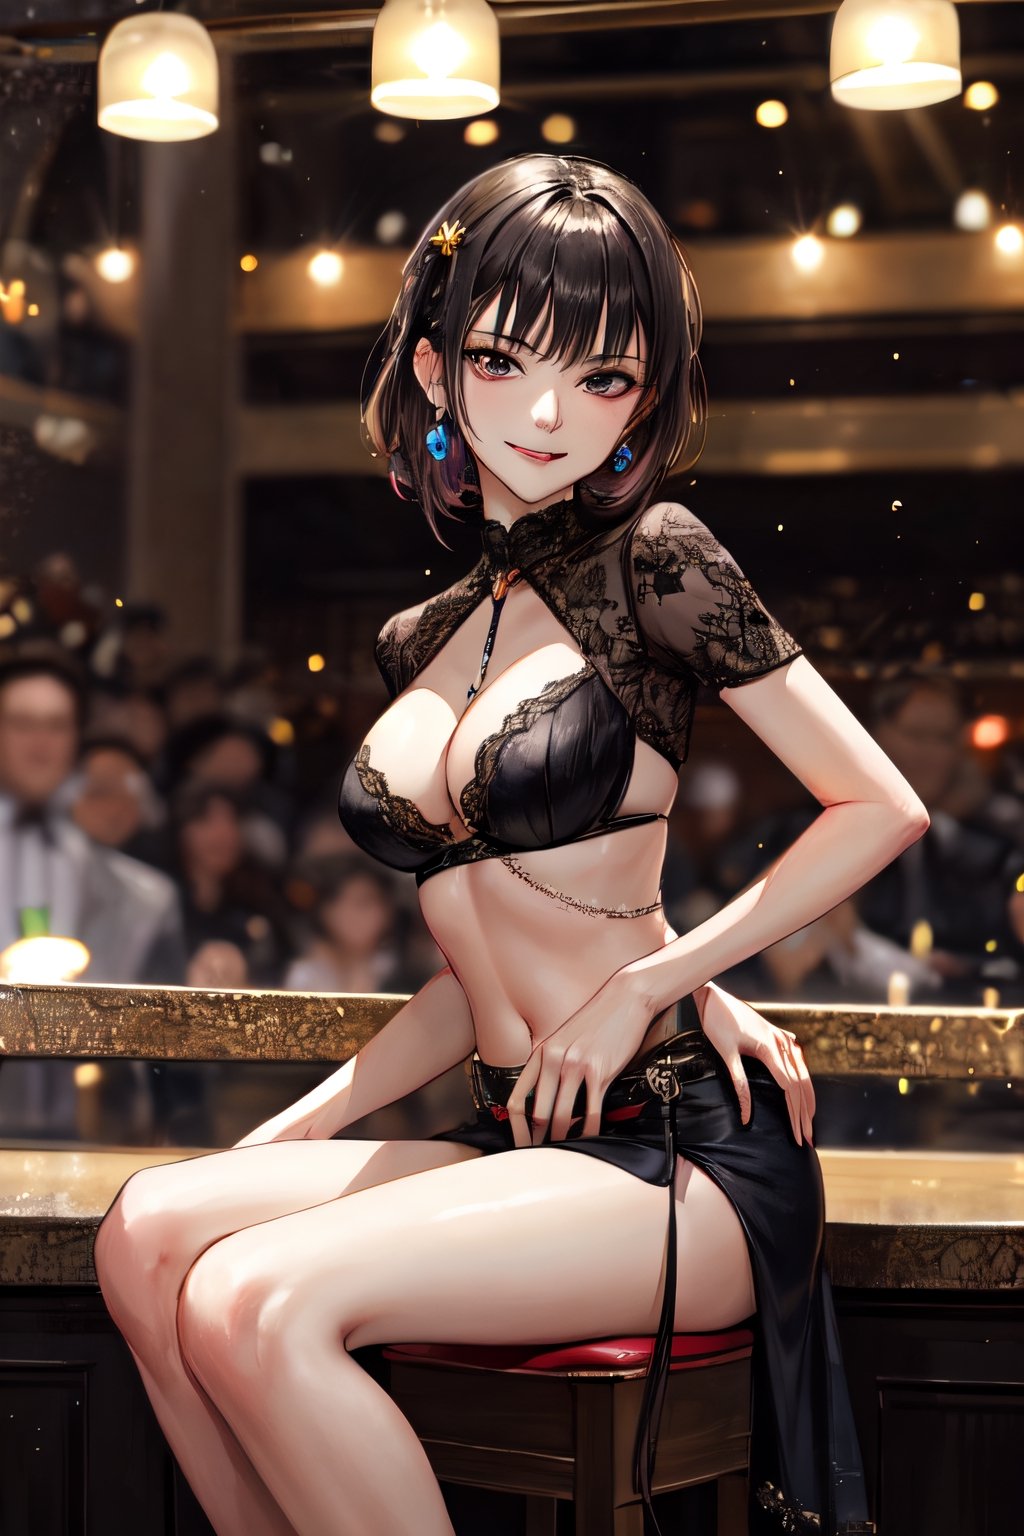 sks woman, facial portrait, sexy stare, smirked, ballroom, lights, crowds, sitting on a stool, 